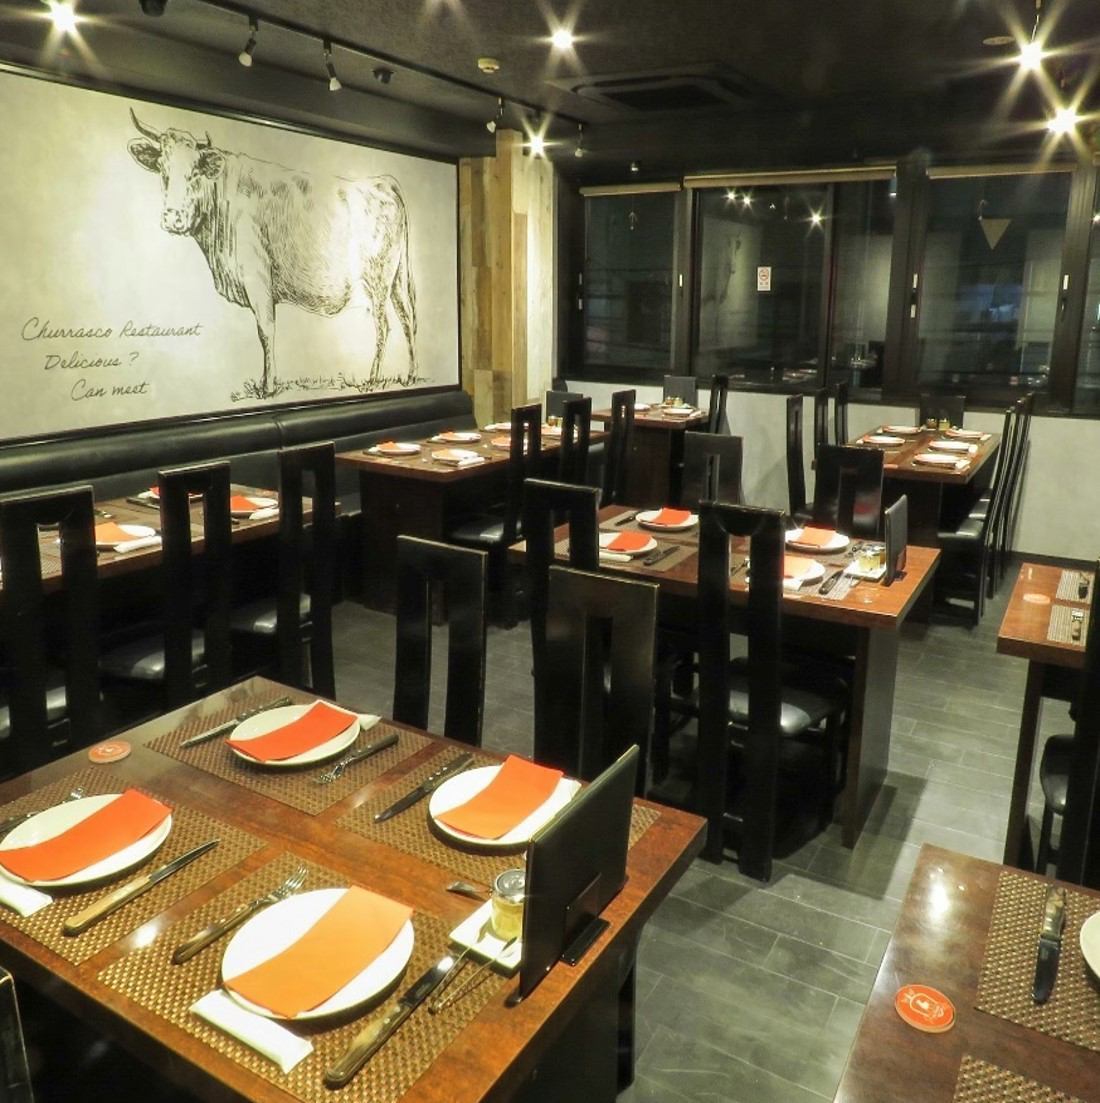 ◆ For various banquets ◆ Spend a luxurious time at Churrasco ♪ More than 40 seats available